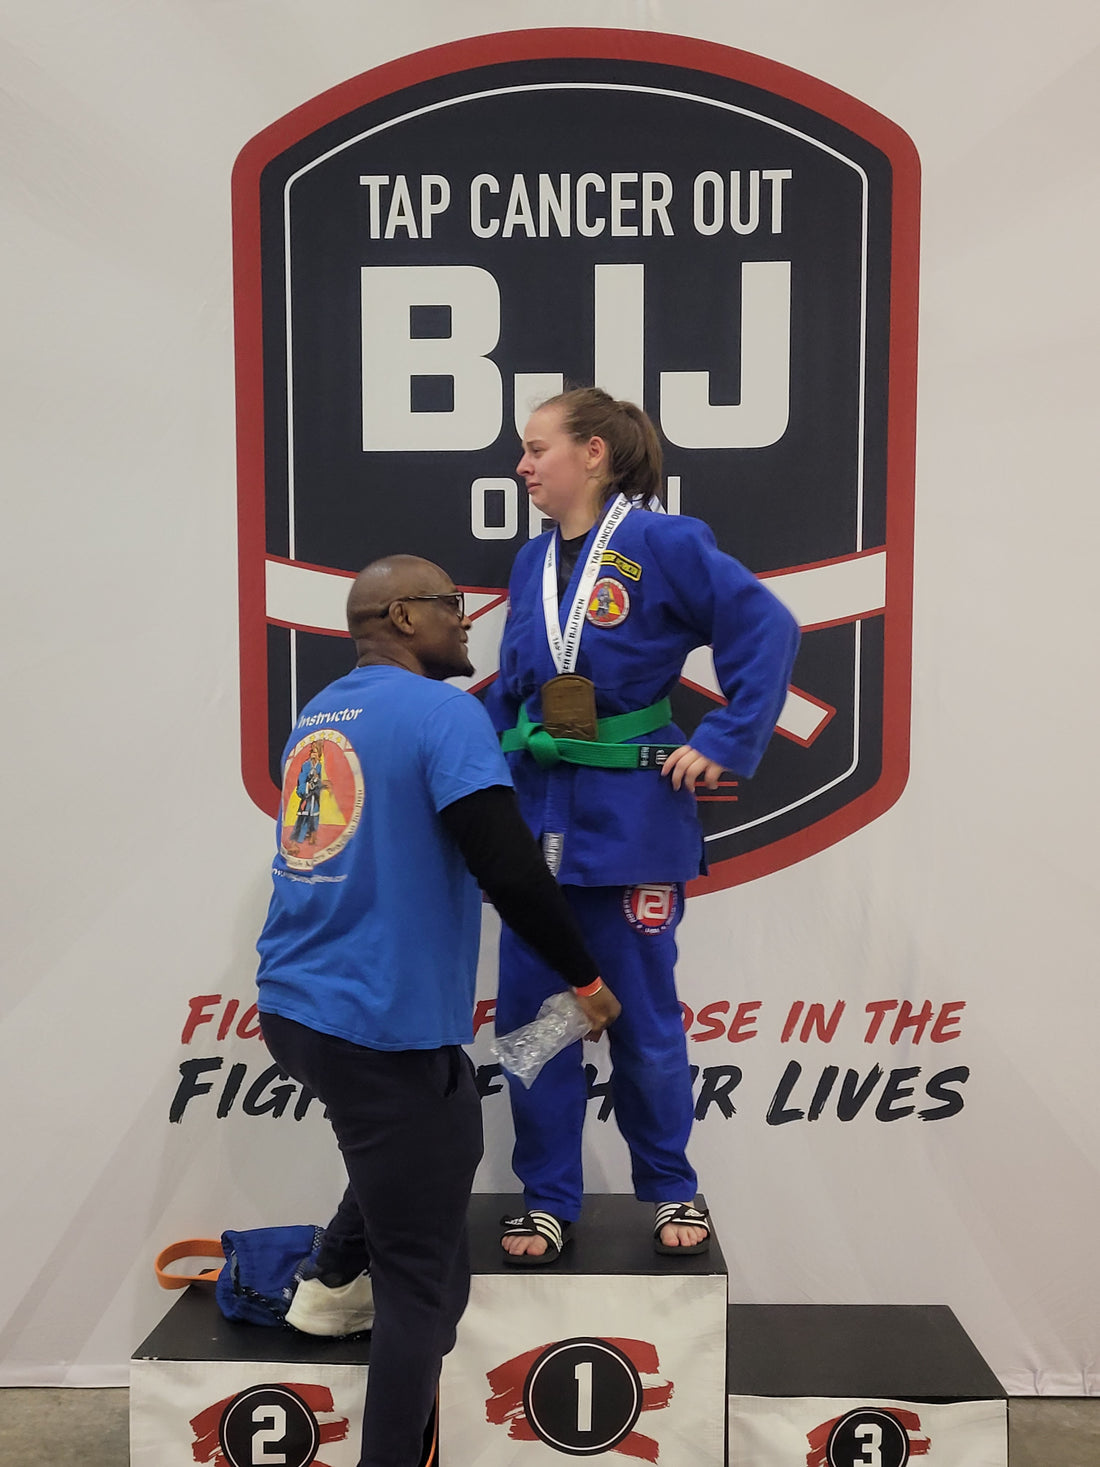 Coach Estelle Promoted to Green Belt